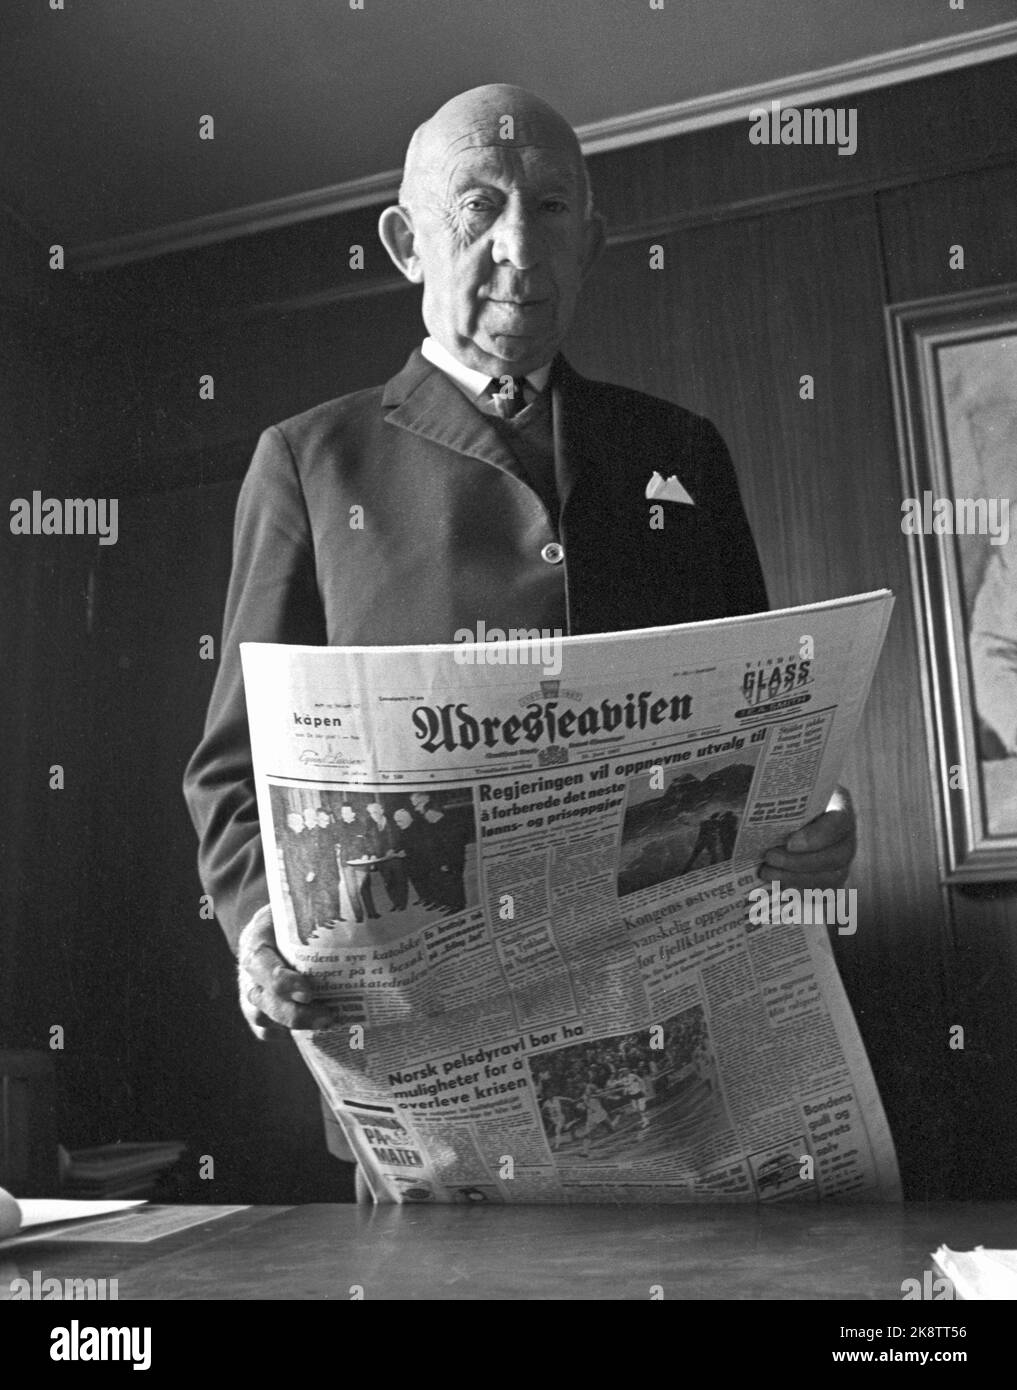 Trondheim 19670601: Adresseavisen "Adressa" is Norway's oldest newspaper. In 1967, the newspaper turned 200 years. Here editor Harald Torp in 1967. Photo: Current / NTB Stock Photo